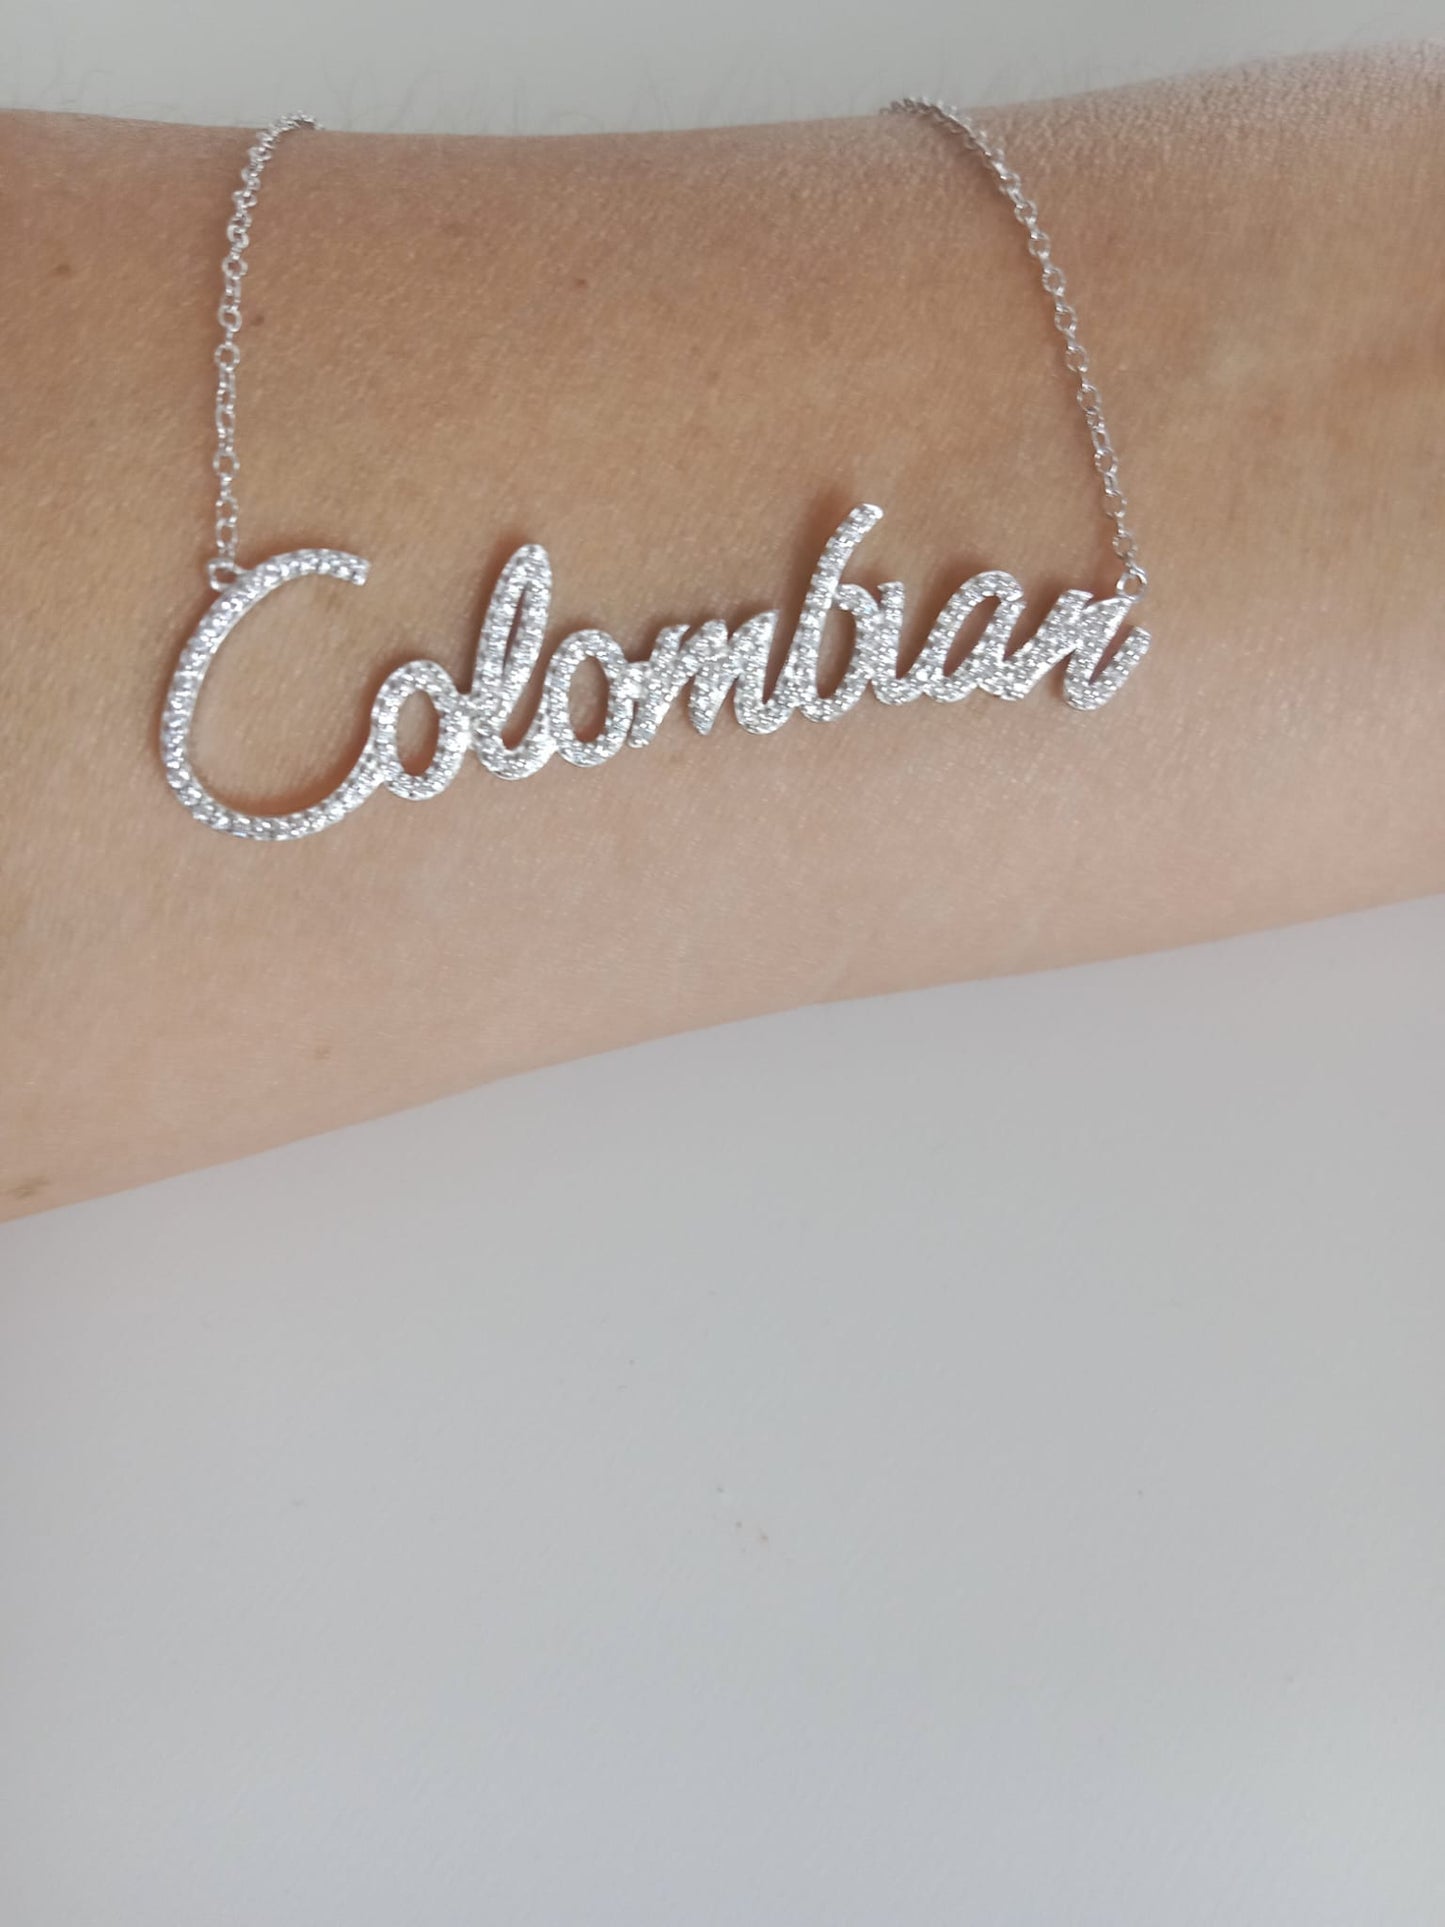 Colombian Necklace Gold and Silver Black Friday